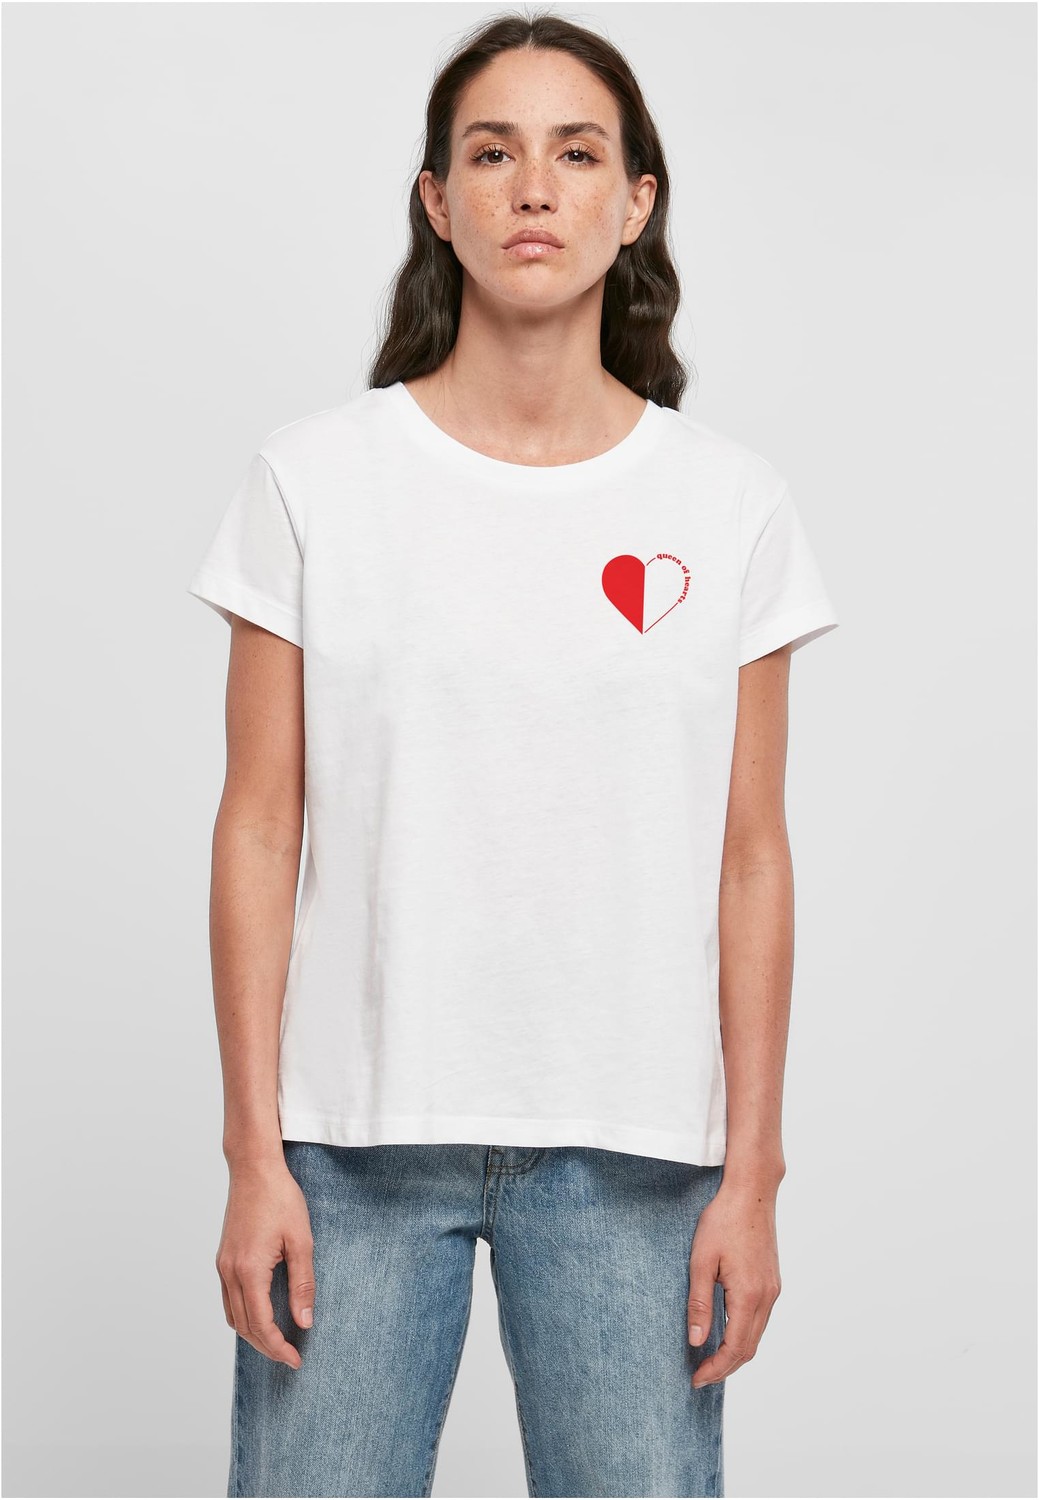 Queen of Hearts Tee white